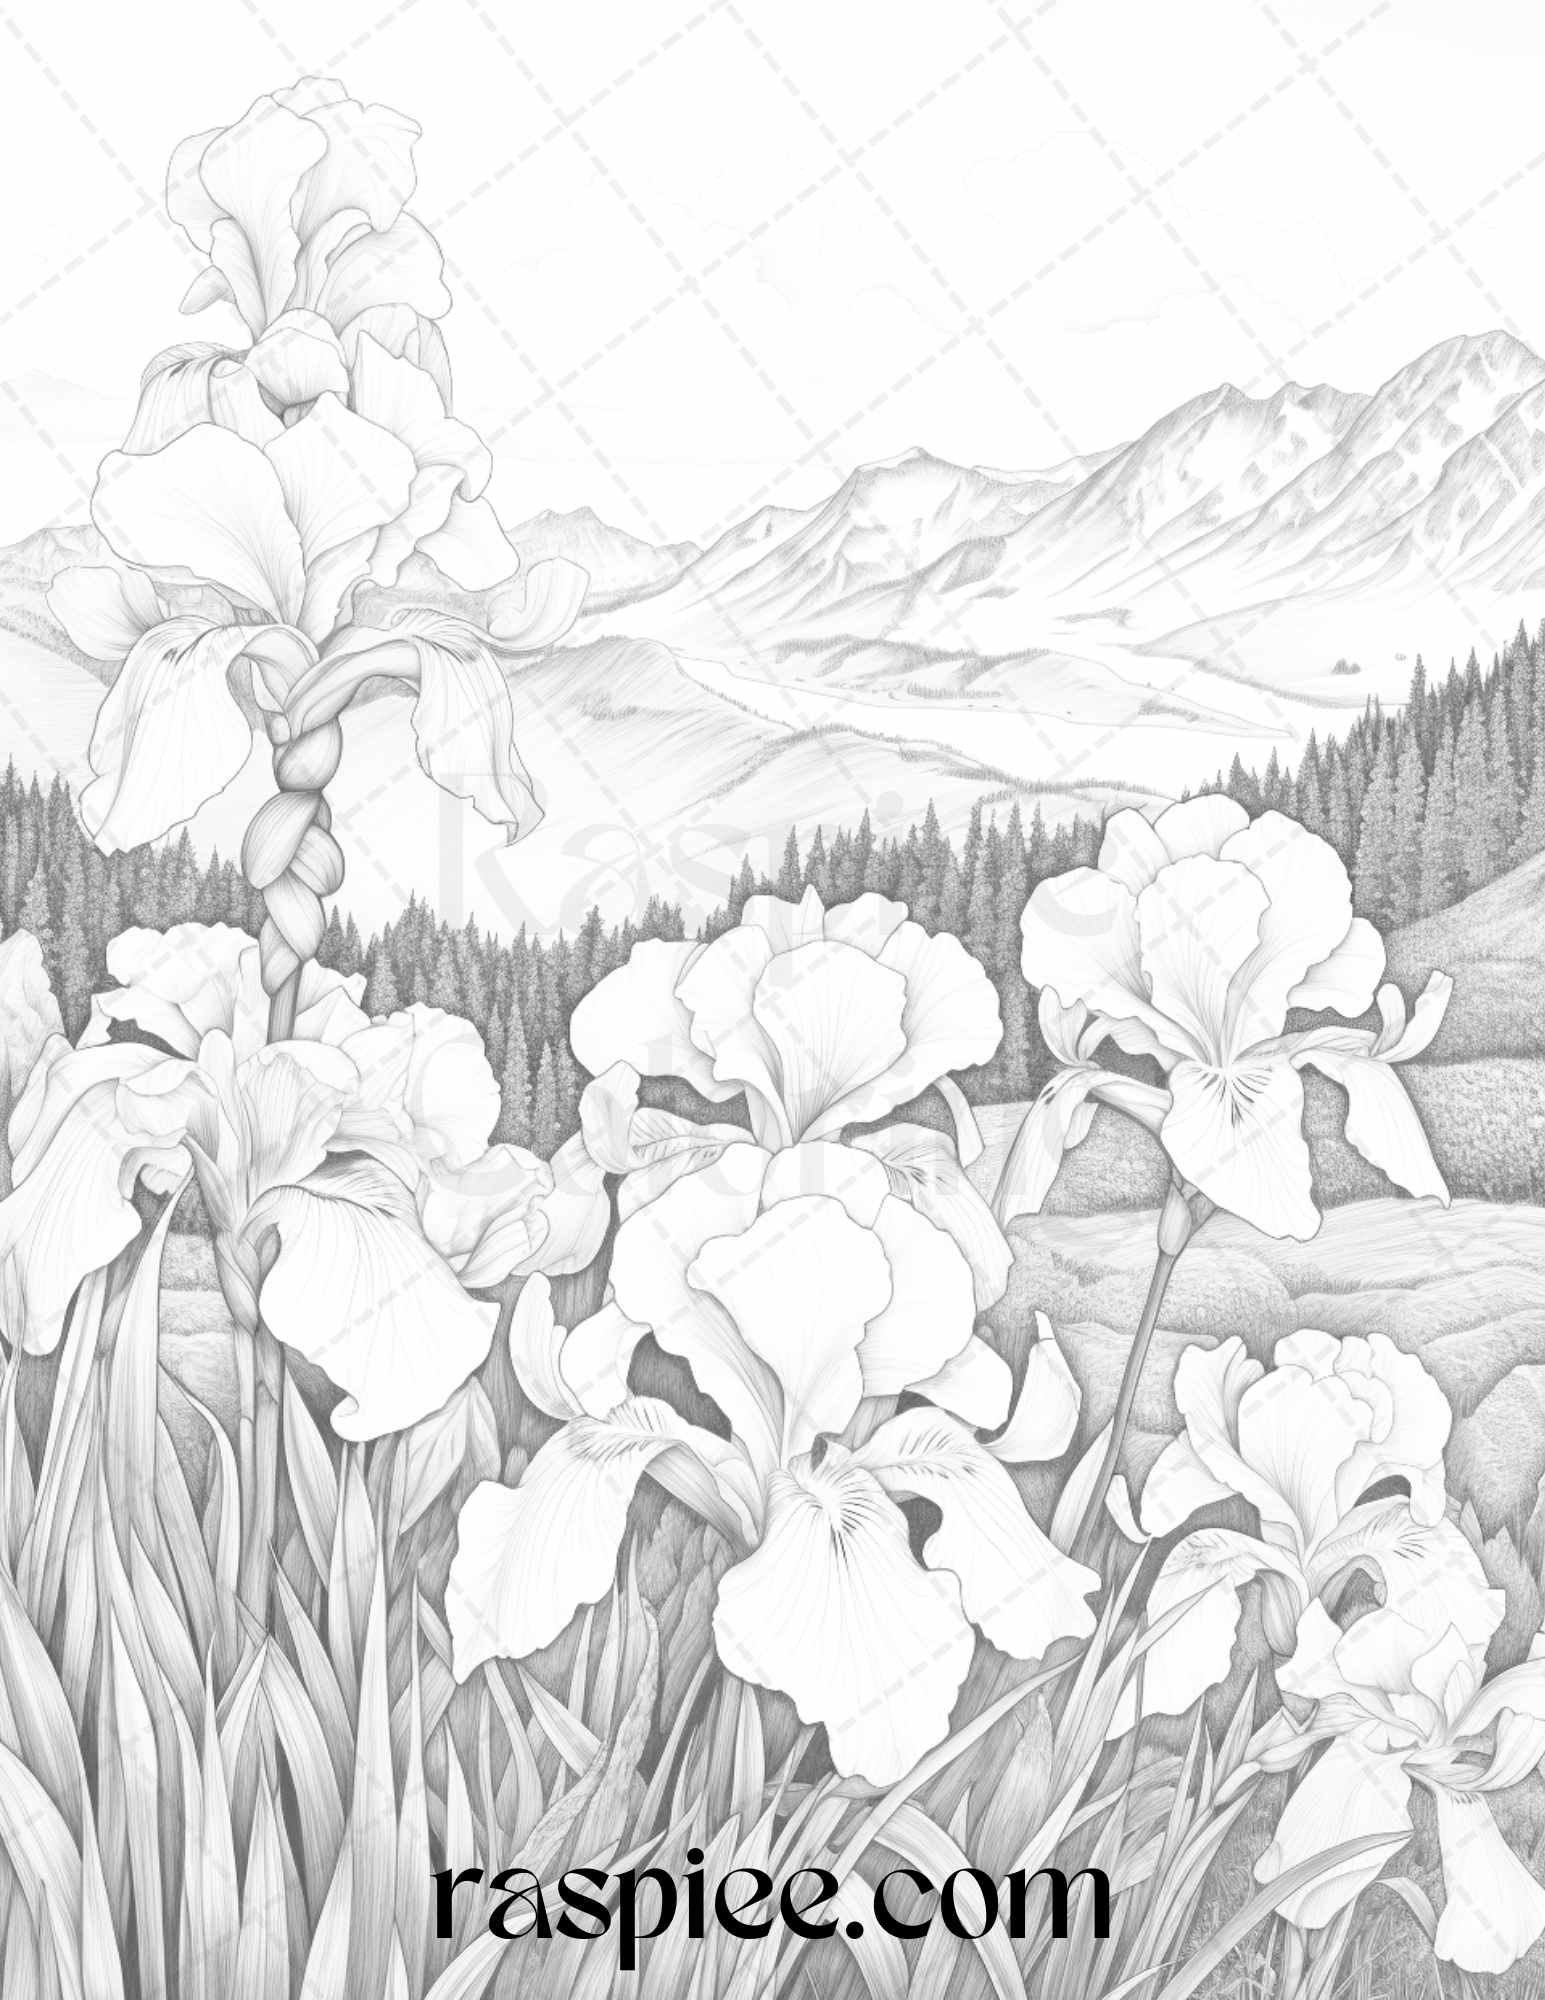 60 Mountain Flower Landscapes Grayscale Coloring Pages Printable for Adults, PDF File Instant Download - Raspiee Coloring